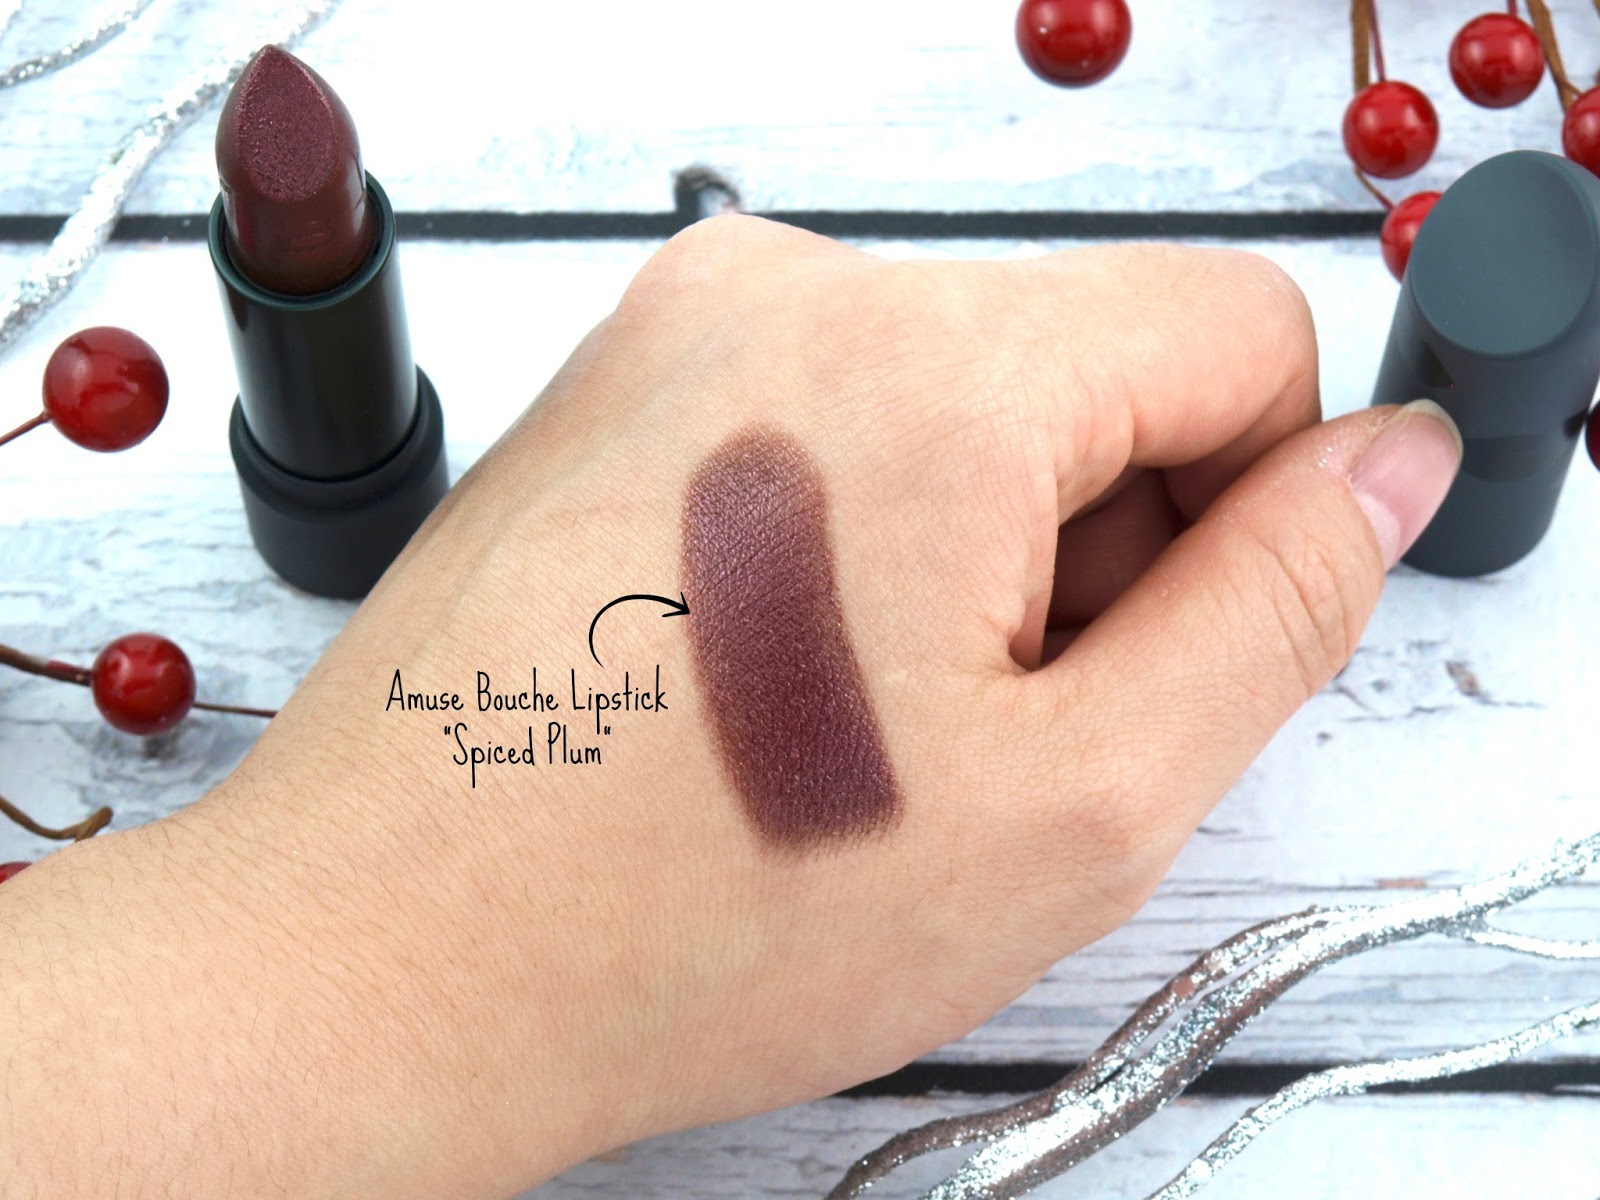 Bite Beauty Holiday 2017 | Amuse Bouche Lipstick in "Spiced Plum": Review and Swatches